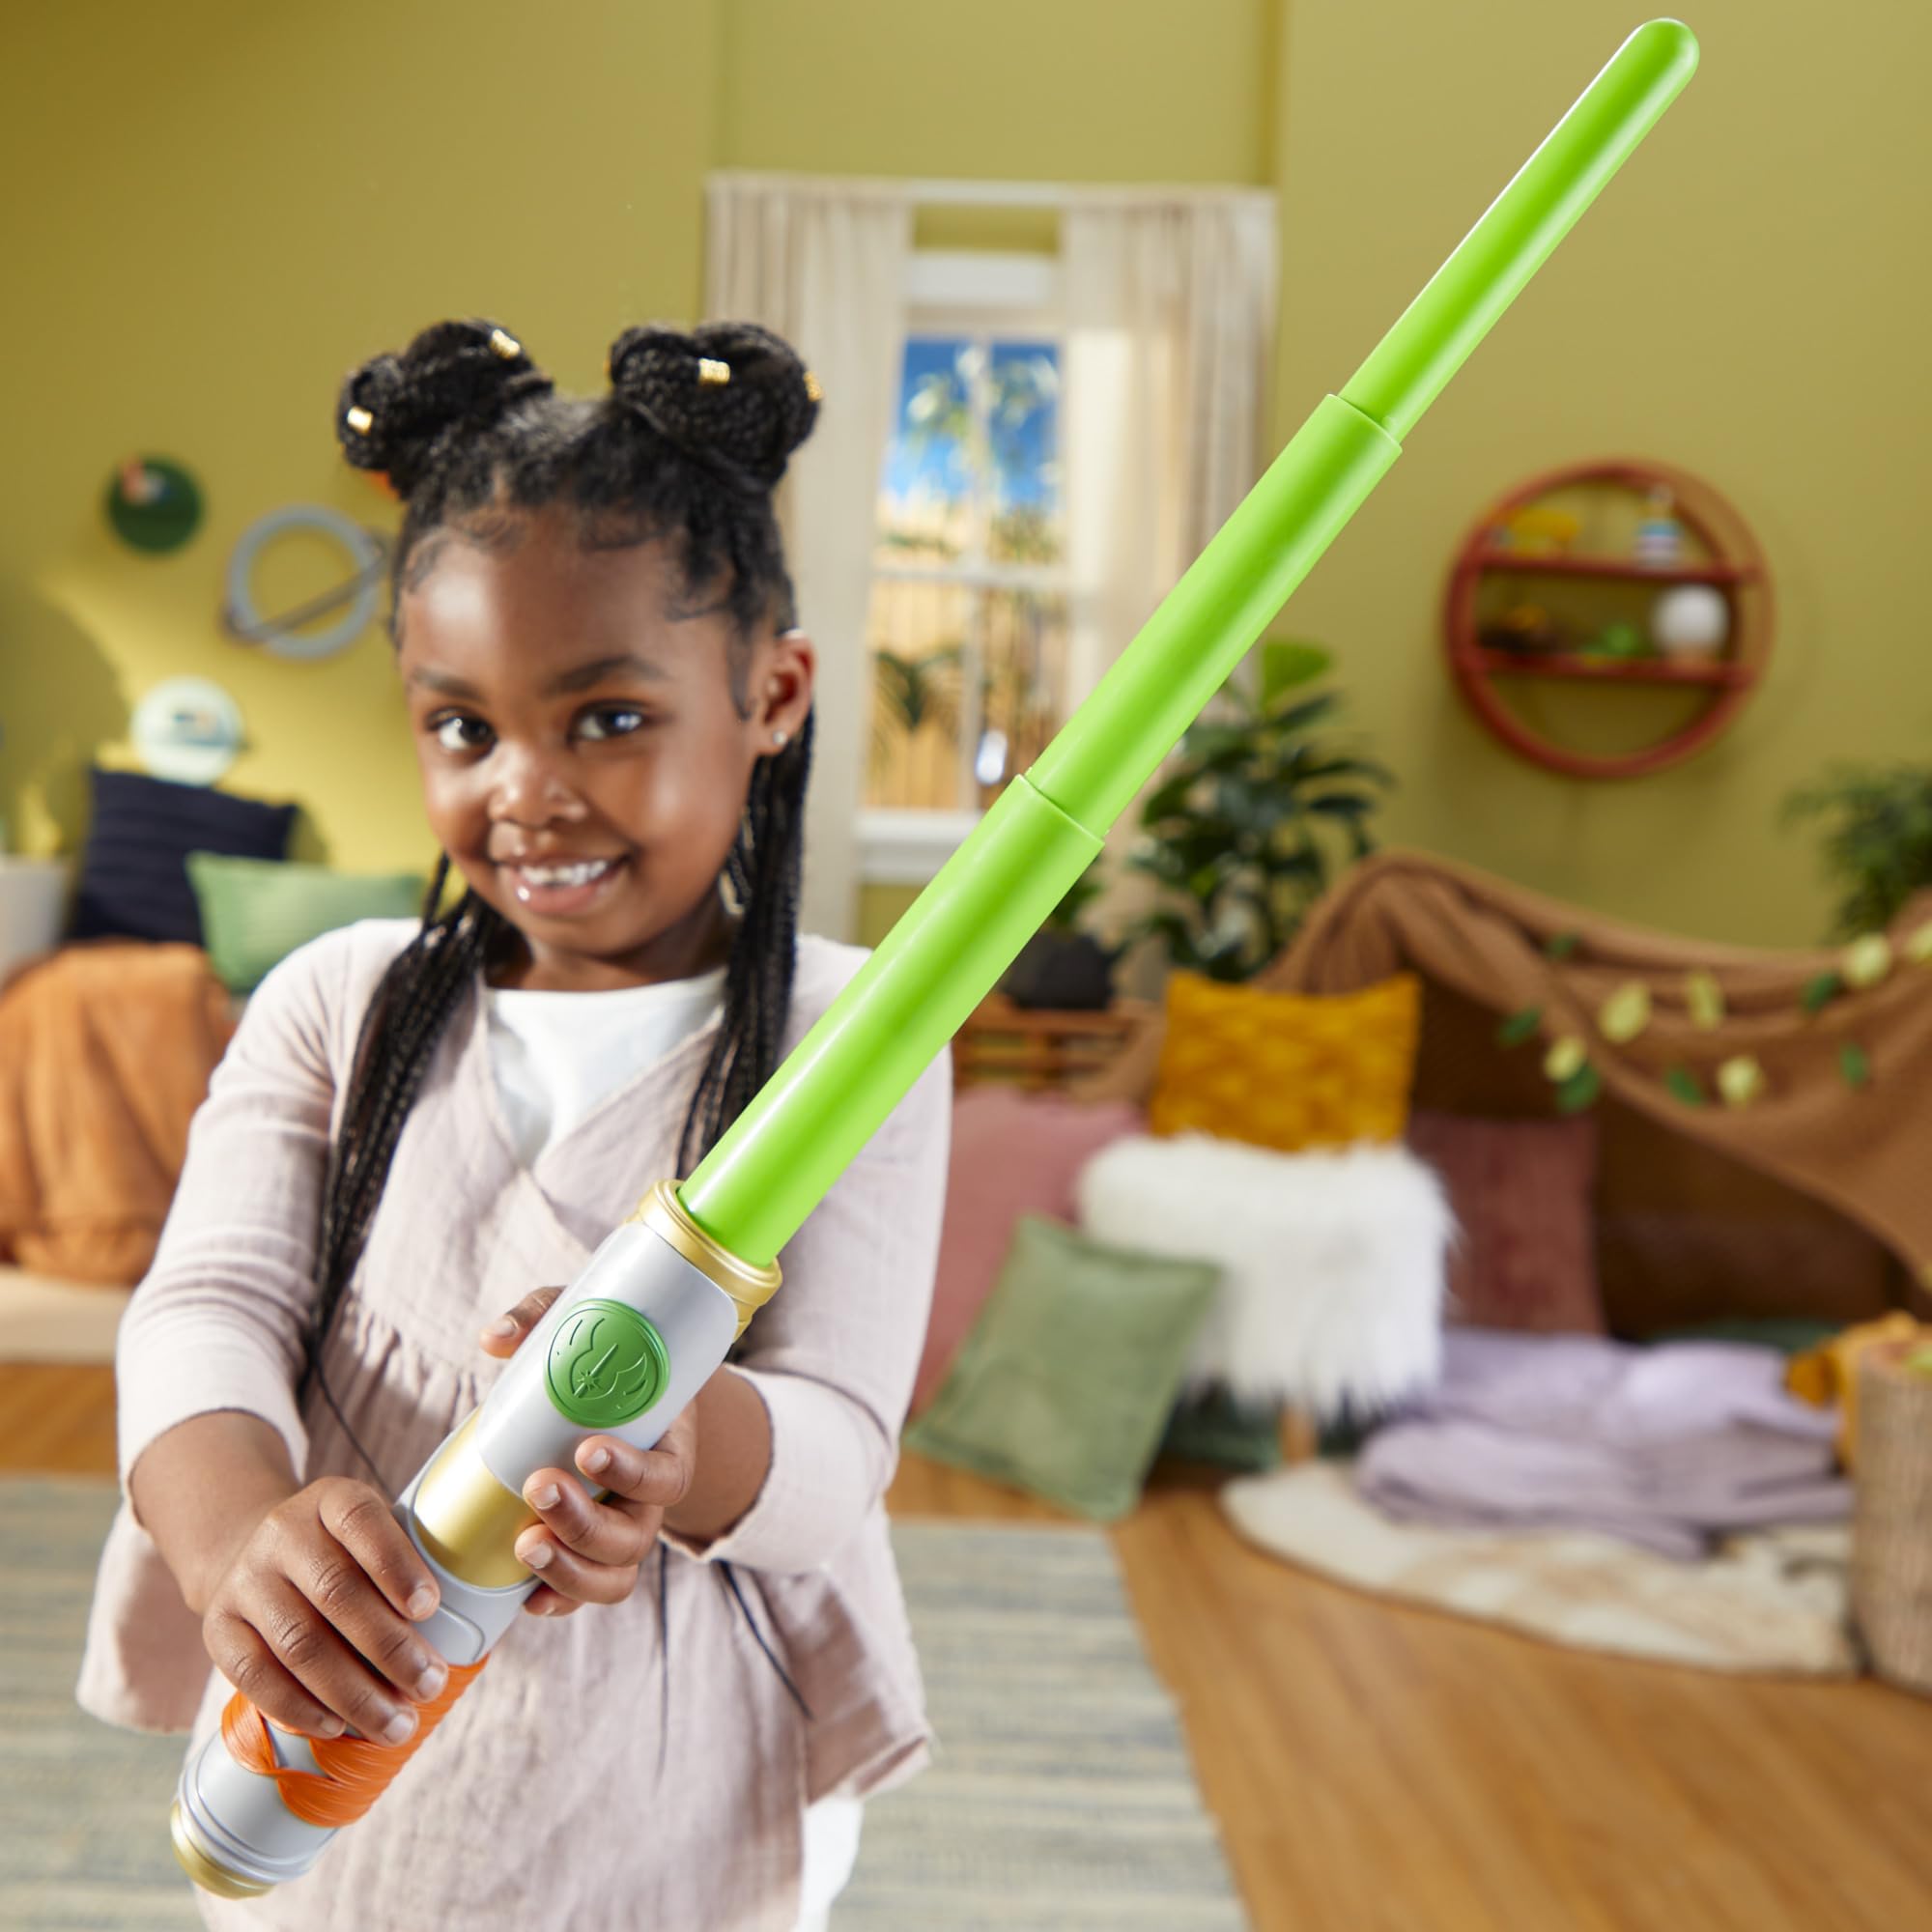 STAR WARS Young Jedi Adventures, Kai Brightstar Green Extendable Lightsaber, Toys, Preschool Toys for 3 Year Old Boys & Girls